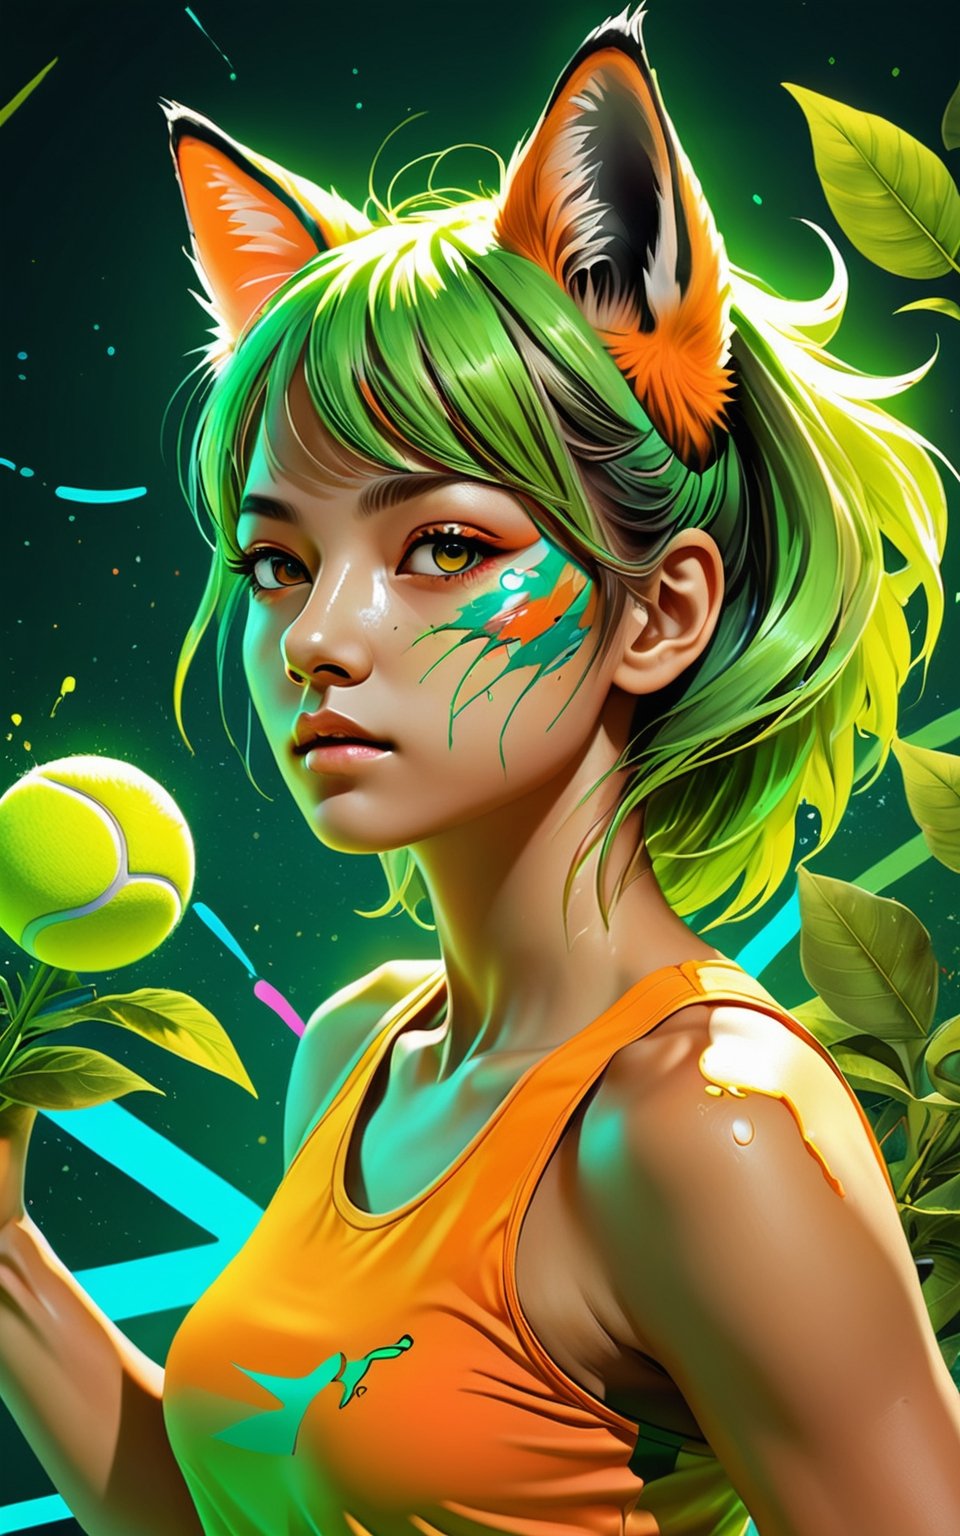 Tiger tennis player in tennis court, (masterpiece:1.1), (highest quality:1.1), (HDR:1.0), extreme quality, cg, (negative space), detailed face+eyes, 1girl, fox ears, (plants:1.18), (fractal art), (bright colors), splashes of color background, colors mashing, paint splatter, complimentary colors, neon, compassionate, electric, limited palette, synthwave, fine art, tan skin, full body, (green and orange:1.2), time stop, sy3, SMM,photo r3al